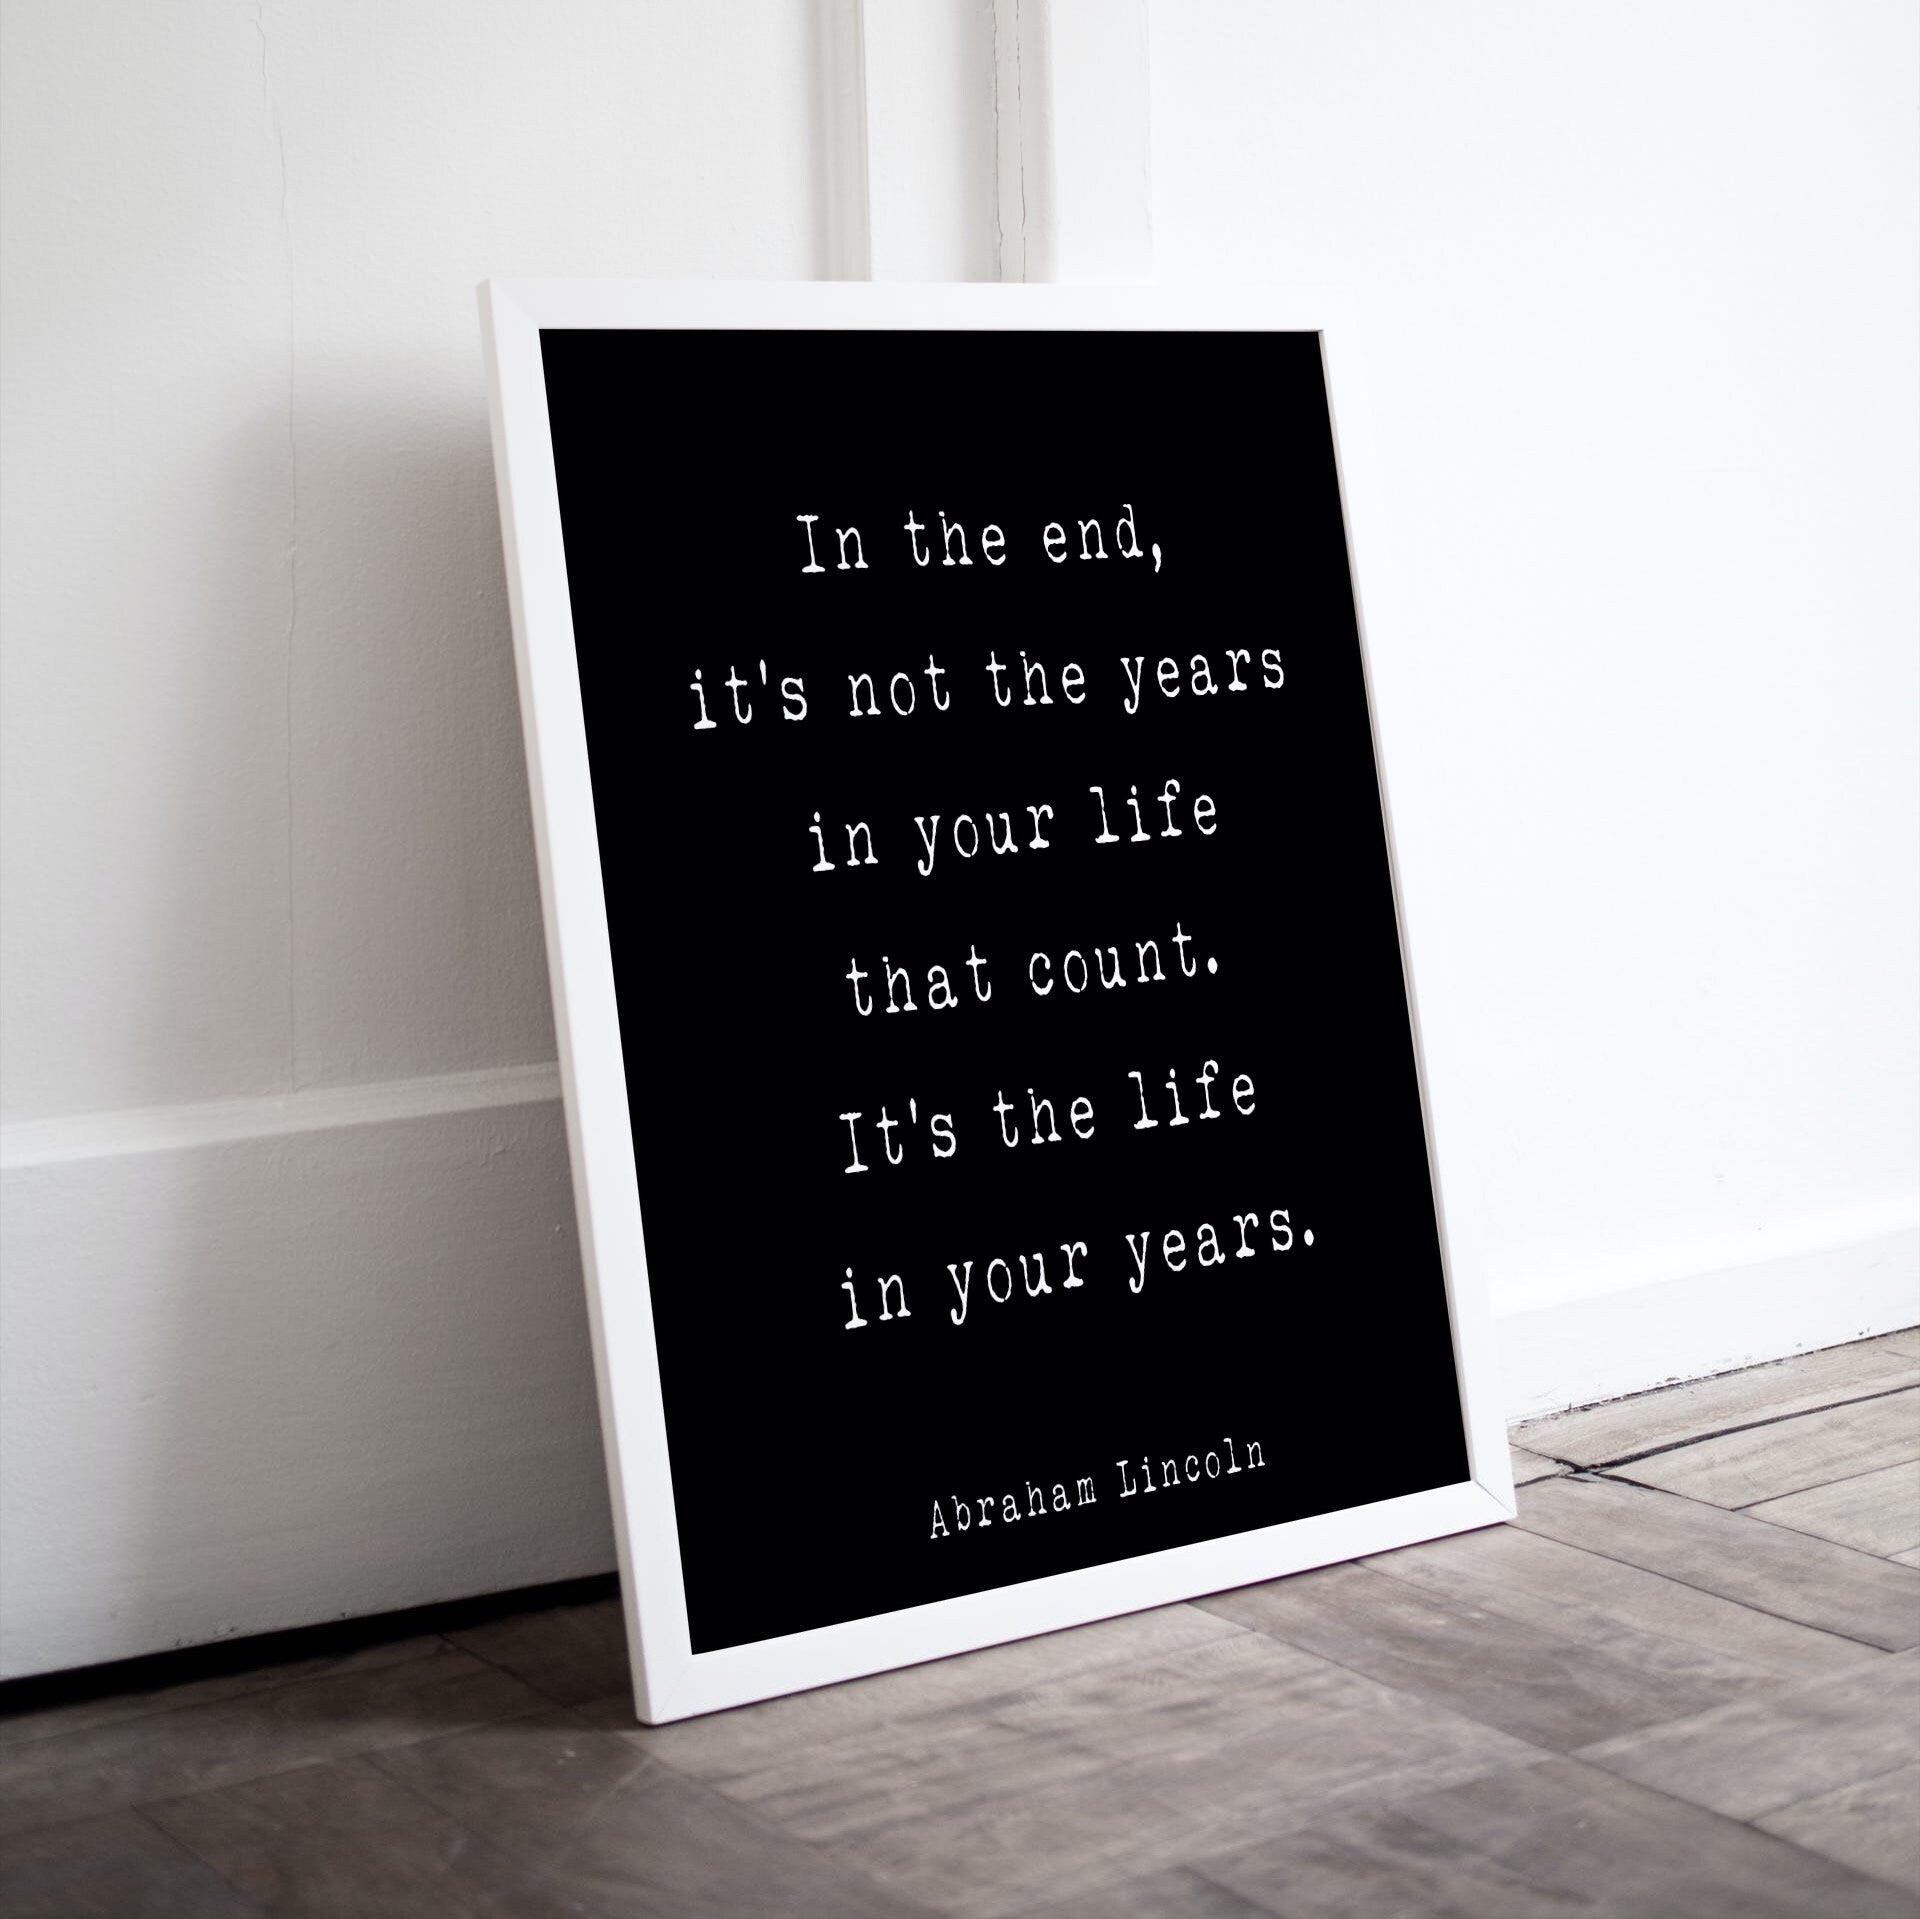 Abraham Lincoln Quote Print, In the end it’s Not the Years in Your Life That Count